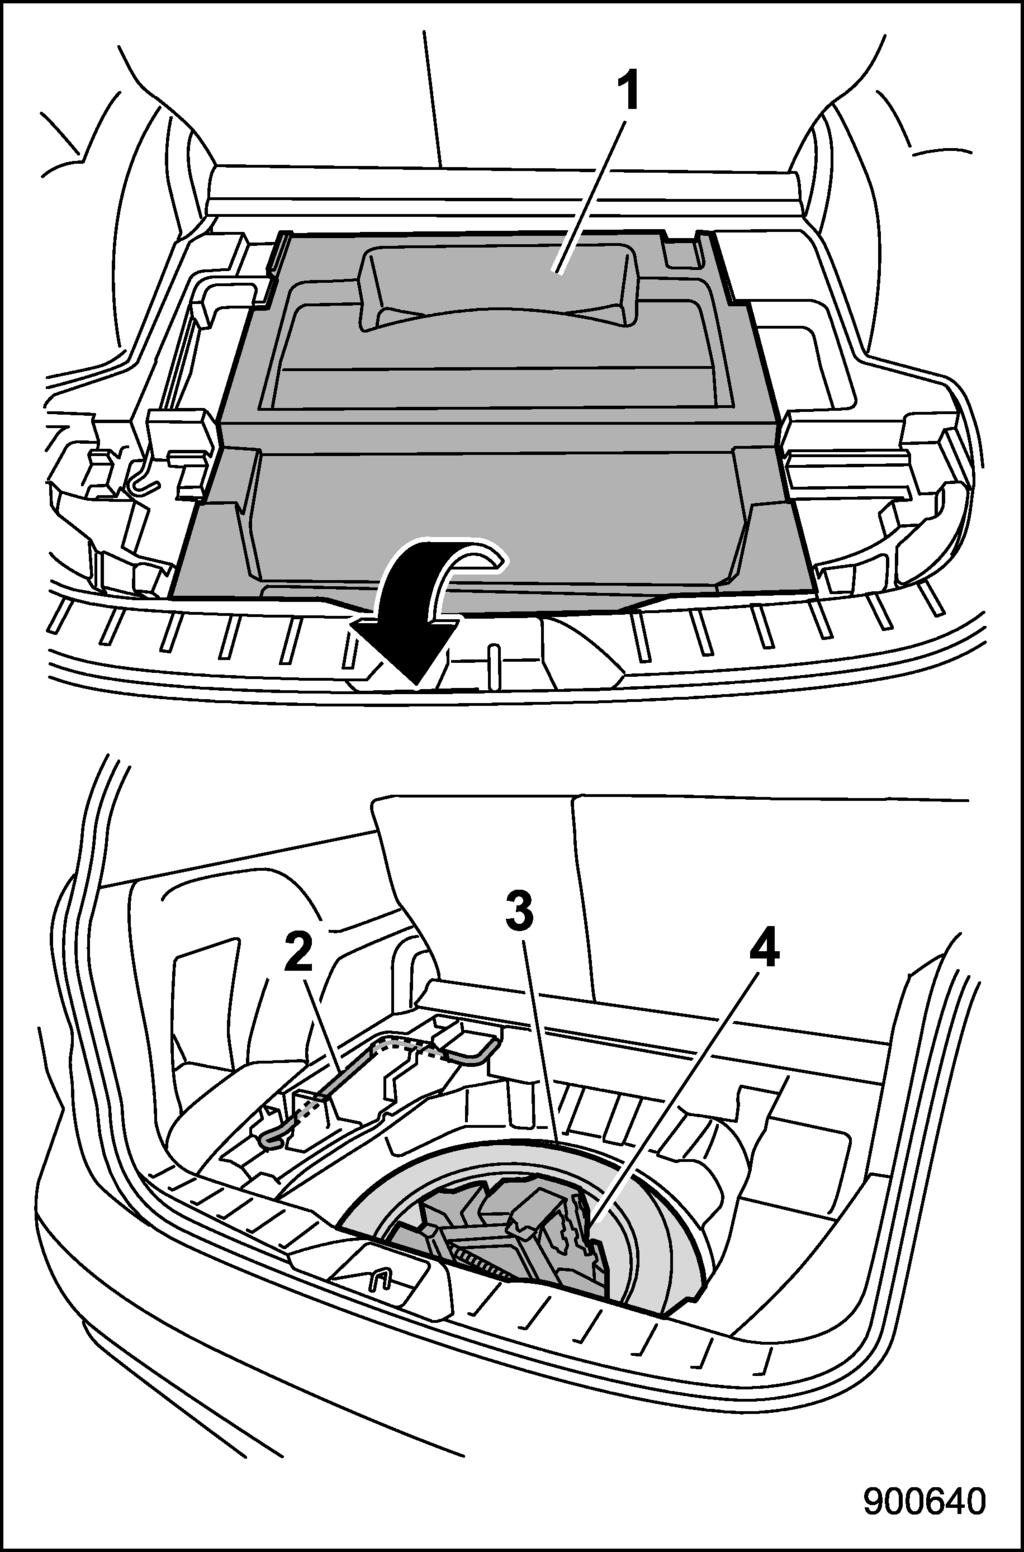 & Under the rear floor The jack, jack handle and towing hook are stored as shown in the following illustrations.